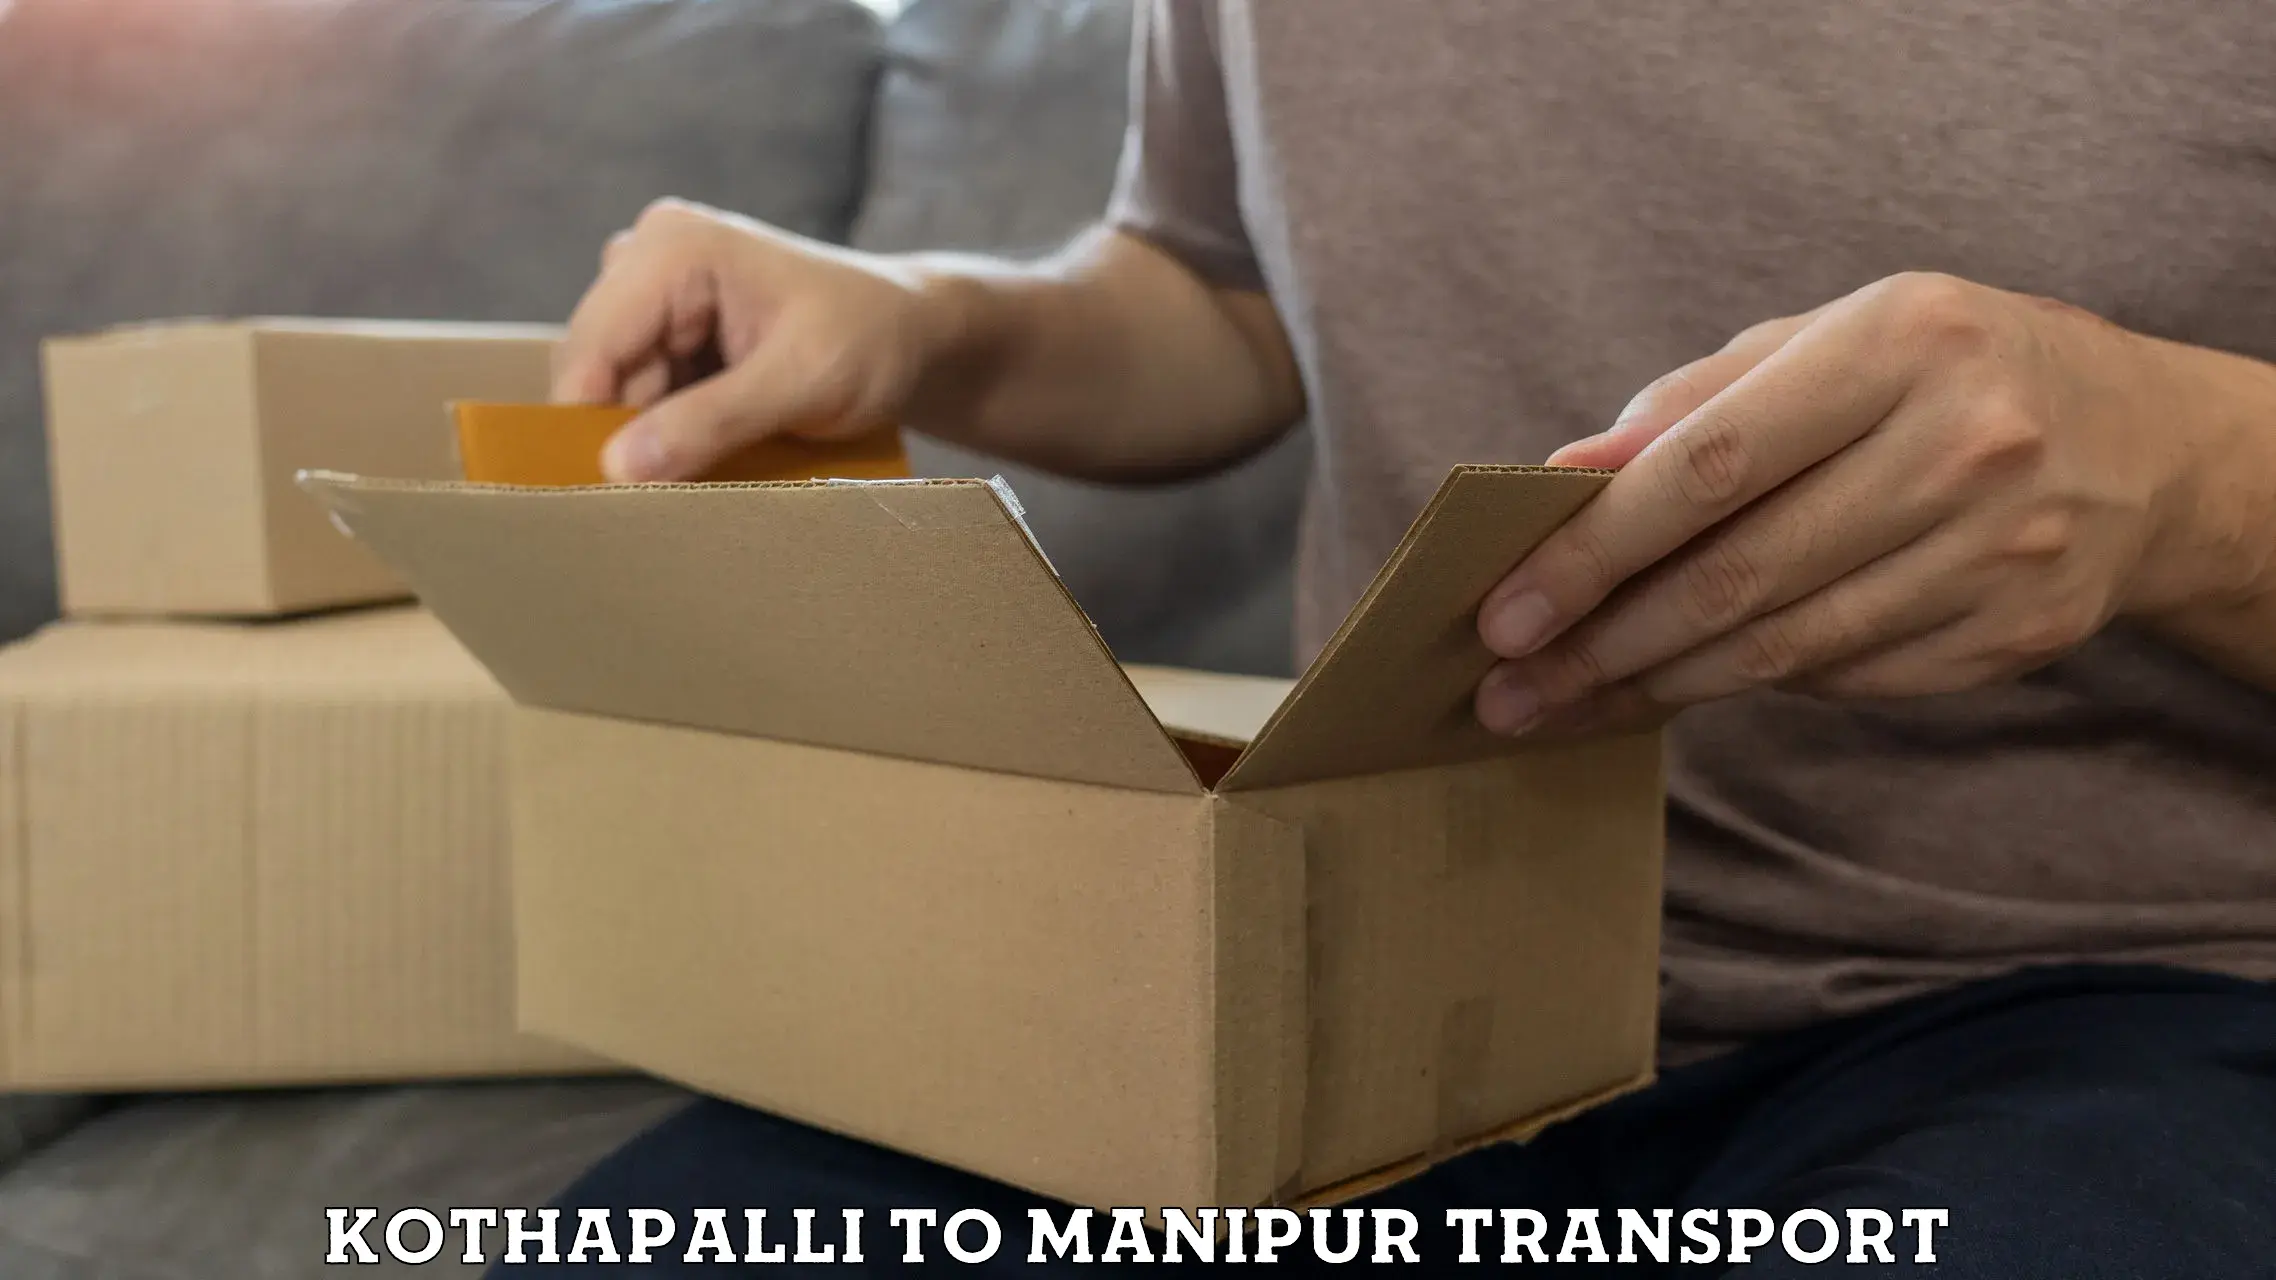 All India transport service Kothapalli to Manipur